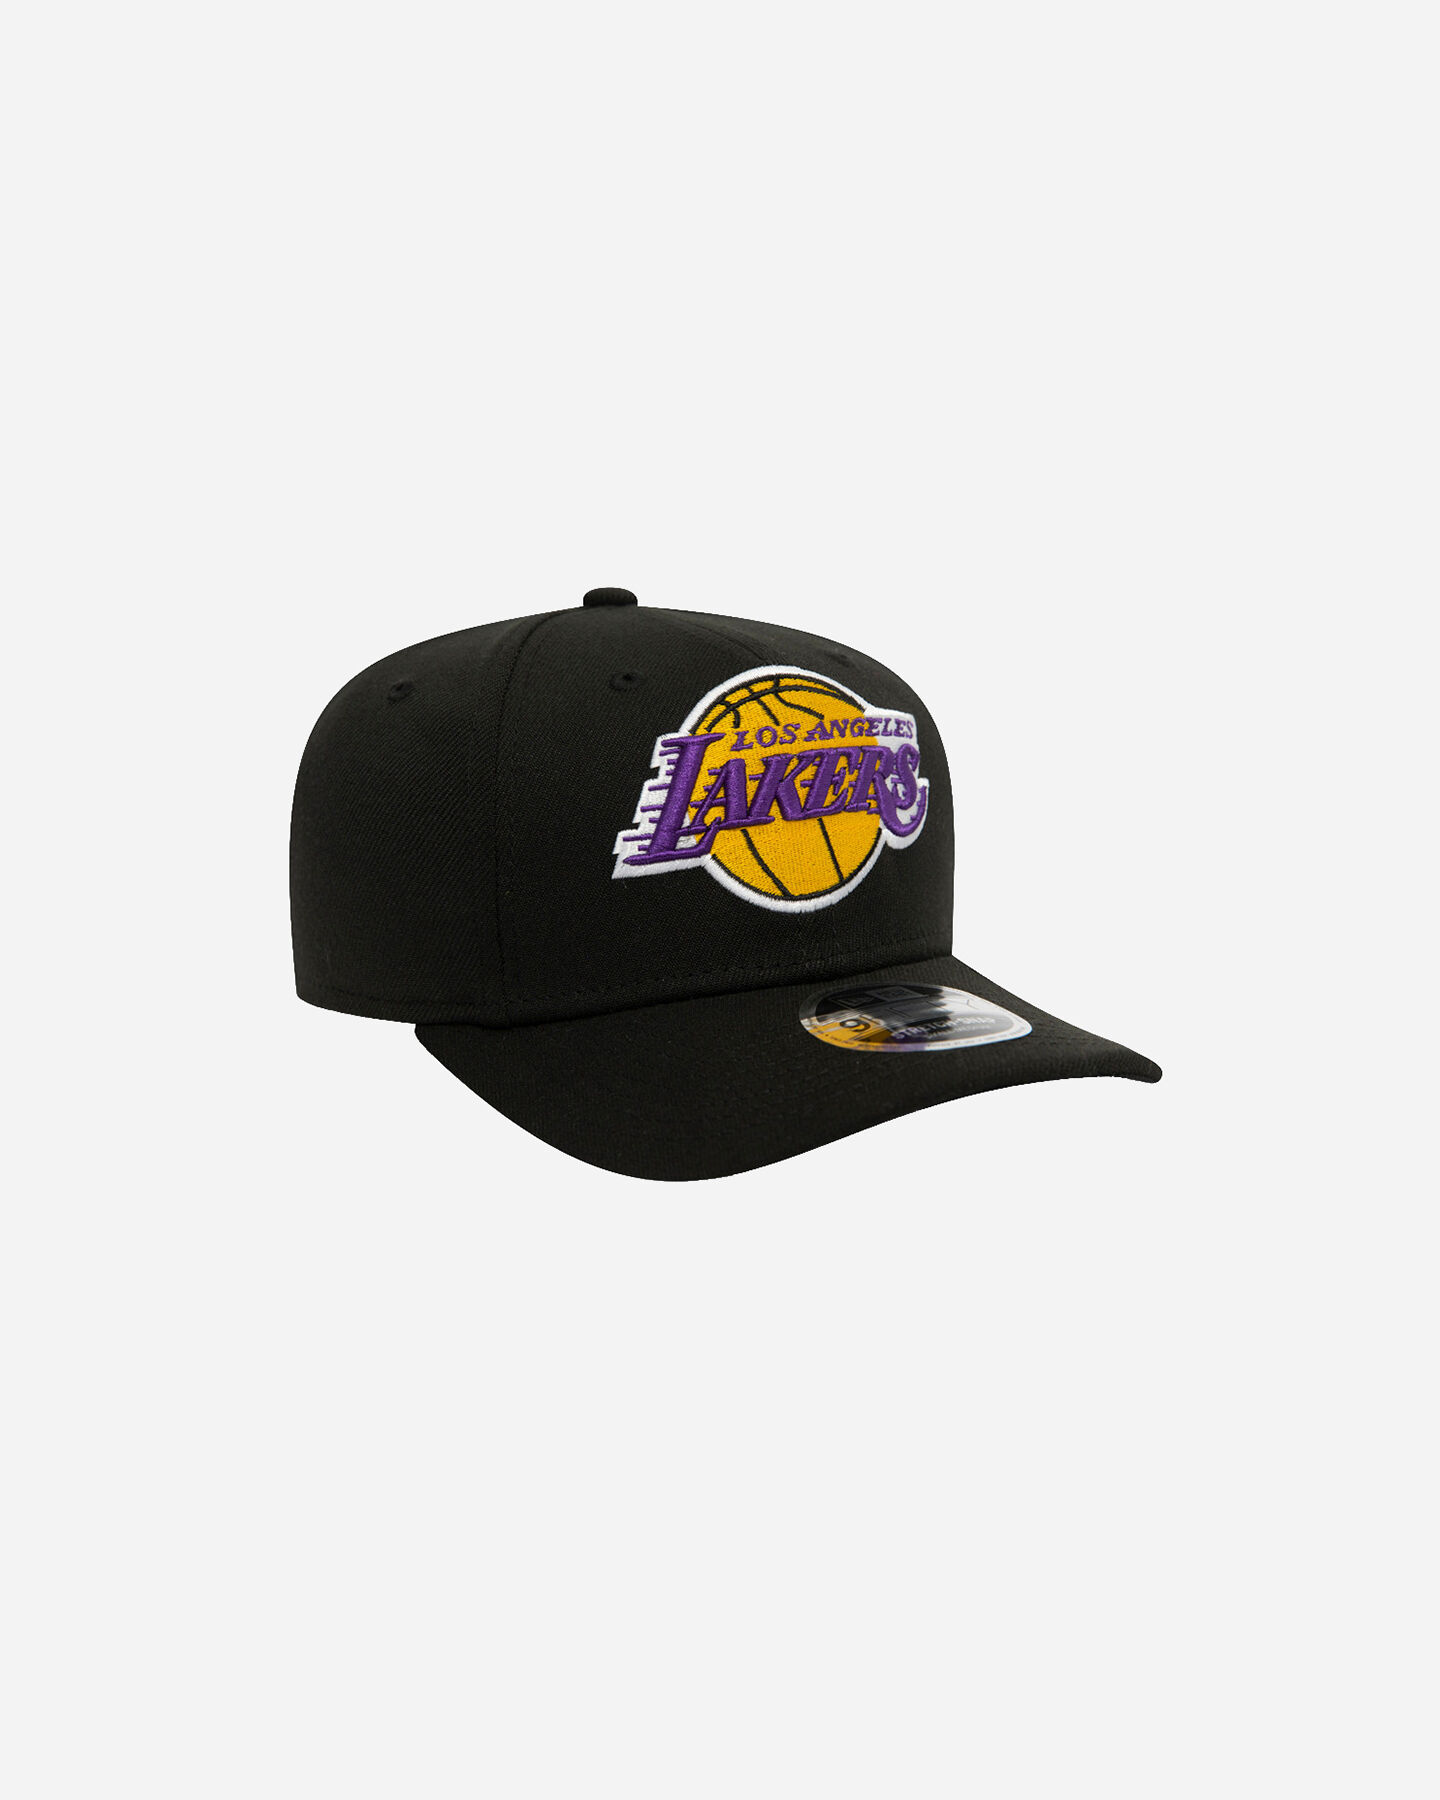  Cappellino NEW ERA 9FIFTY LOS ANGELES LAKERS  S5100642|001|SM scatto 2